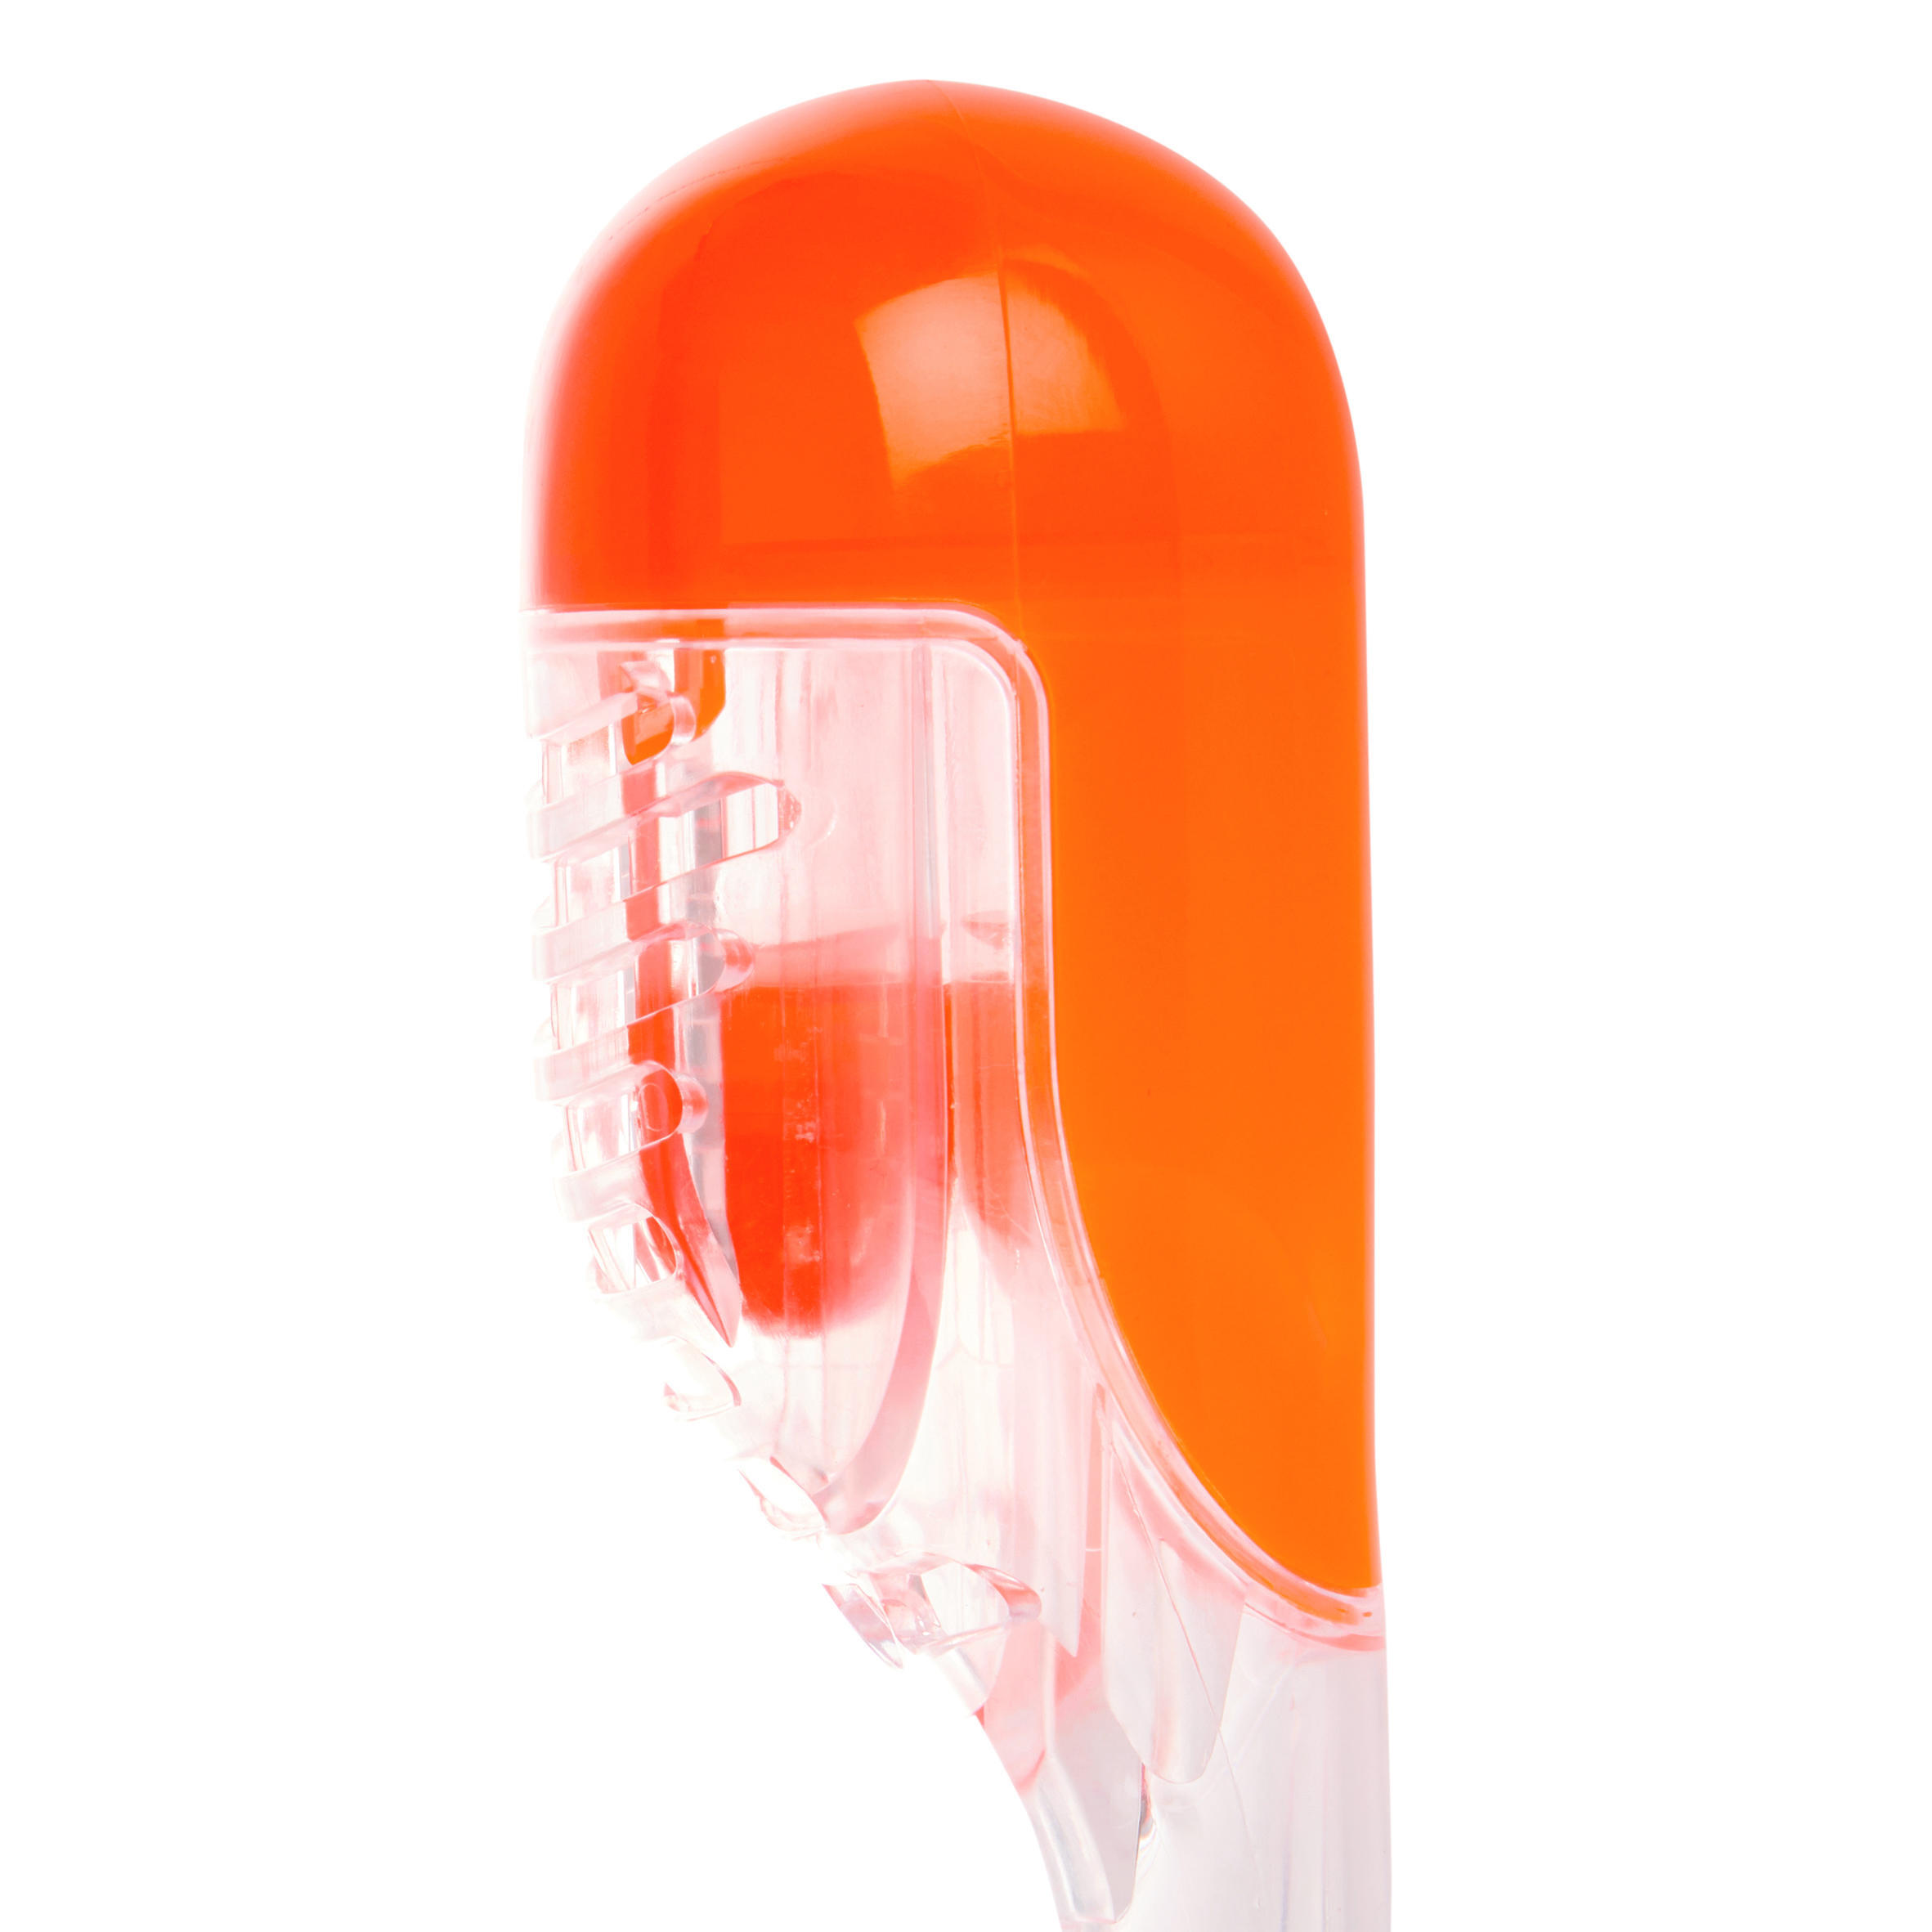 Easybreath separate snorkel is compatible with sizes XS to M/L 3/4